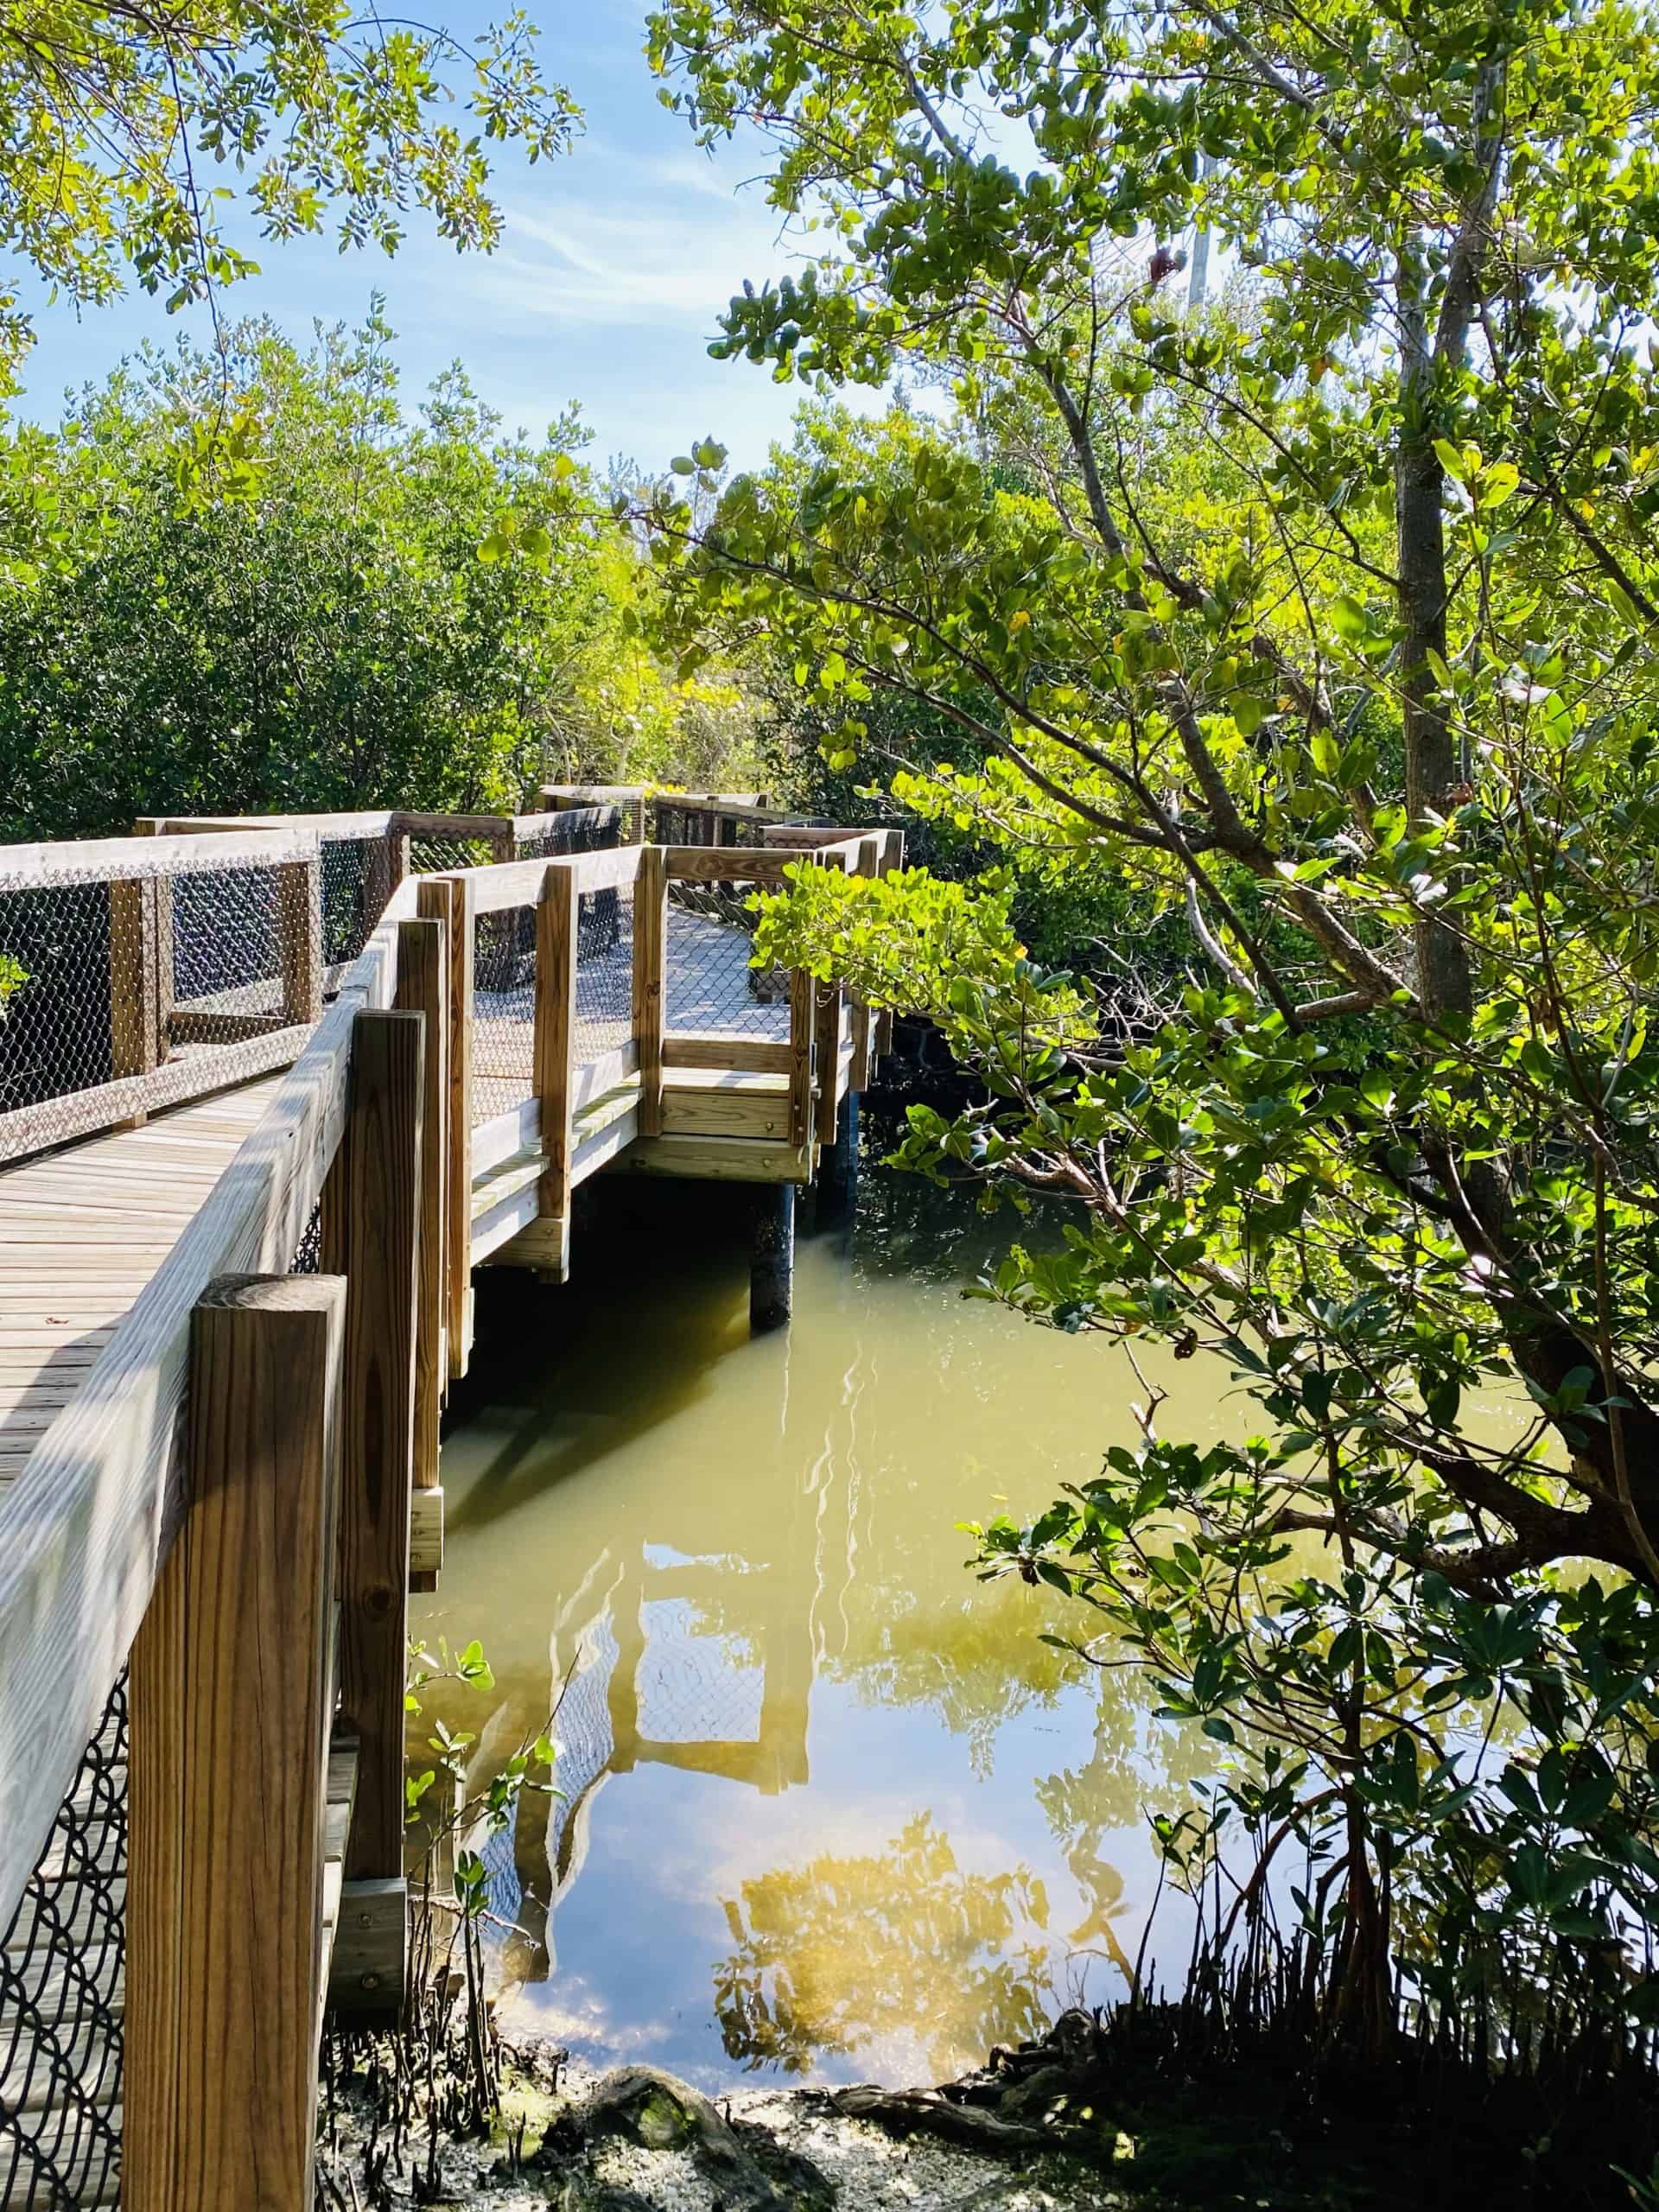 Clam Bayou Nature Preserve and Park has these beautiful ada accessible trails.